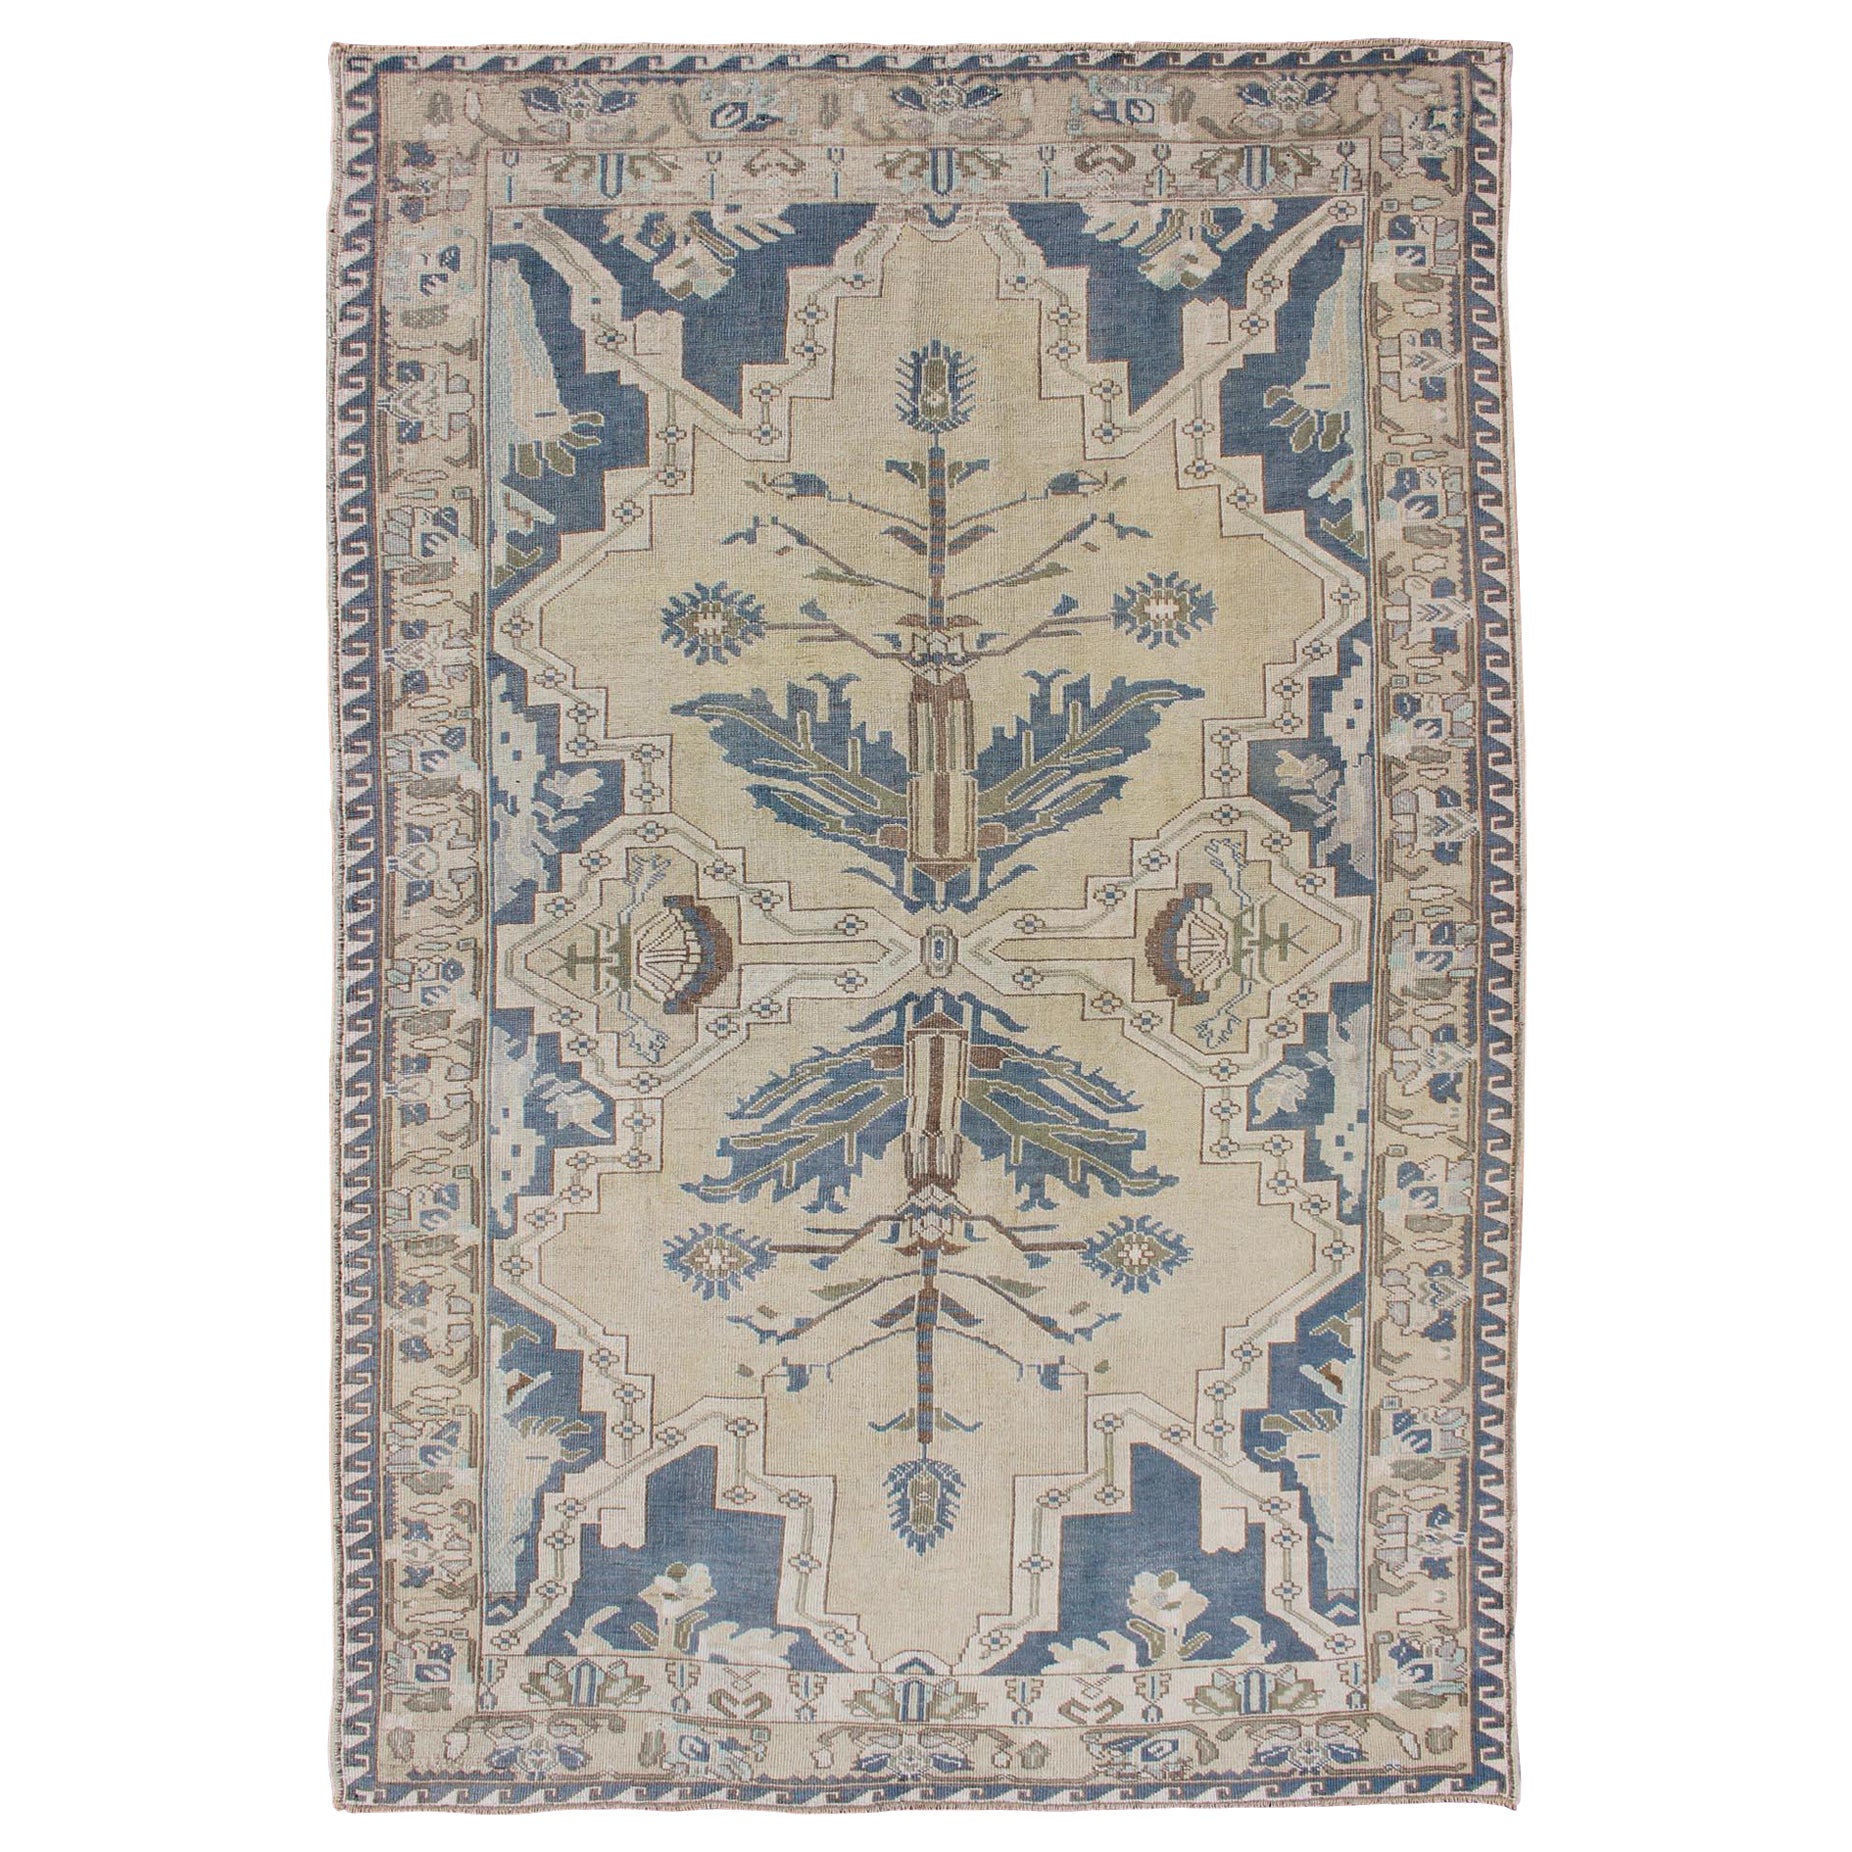 Vintage Turkish Rug with Unique Design in Blue, Taupe, Butter & Neutral Colors For Sale